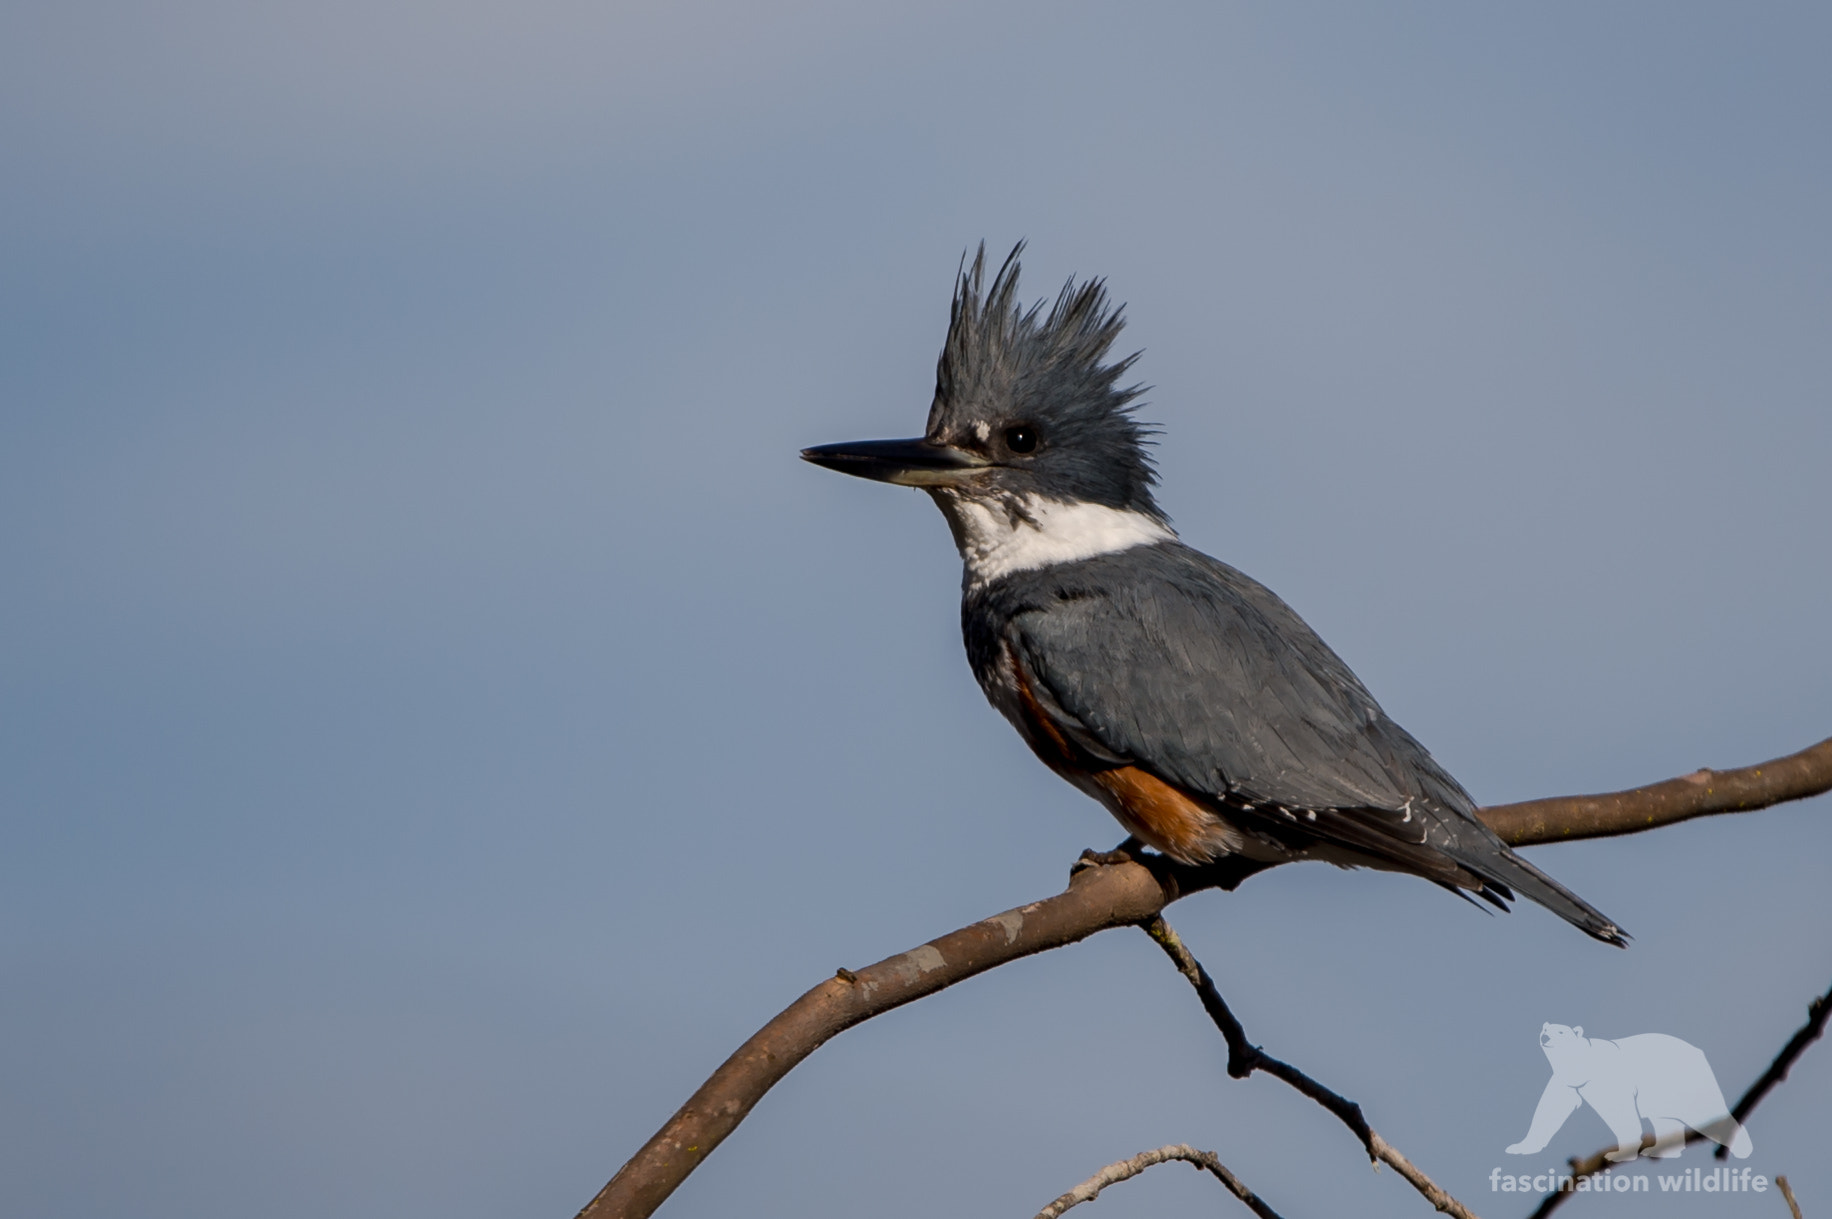 Nikon D4S + Sigma 150-600mm F5-6.3 DG OS HSM | S sample photo. Belted kingfisher photography